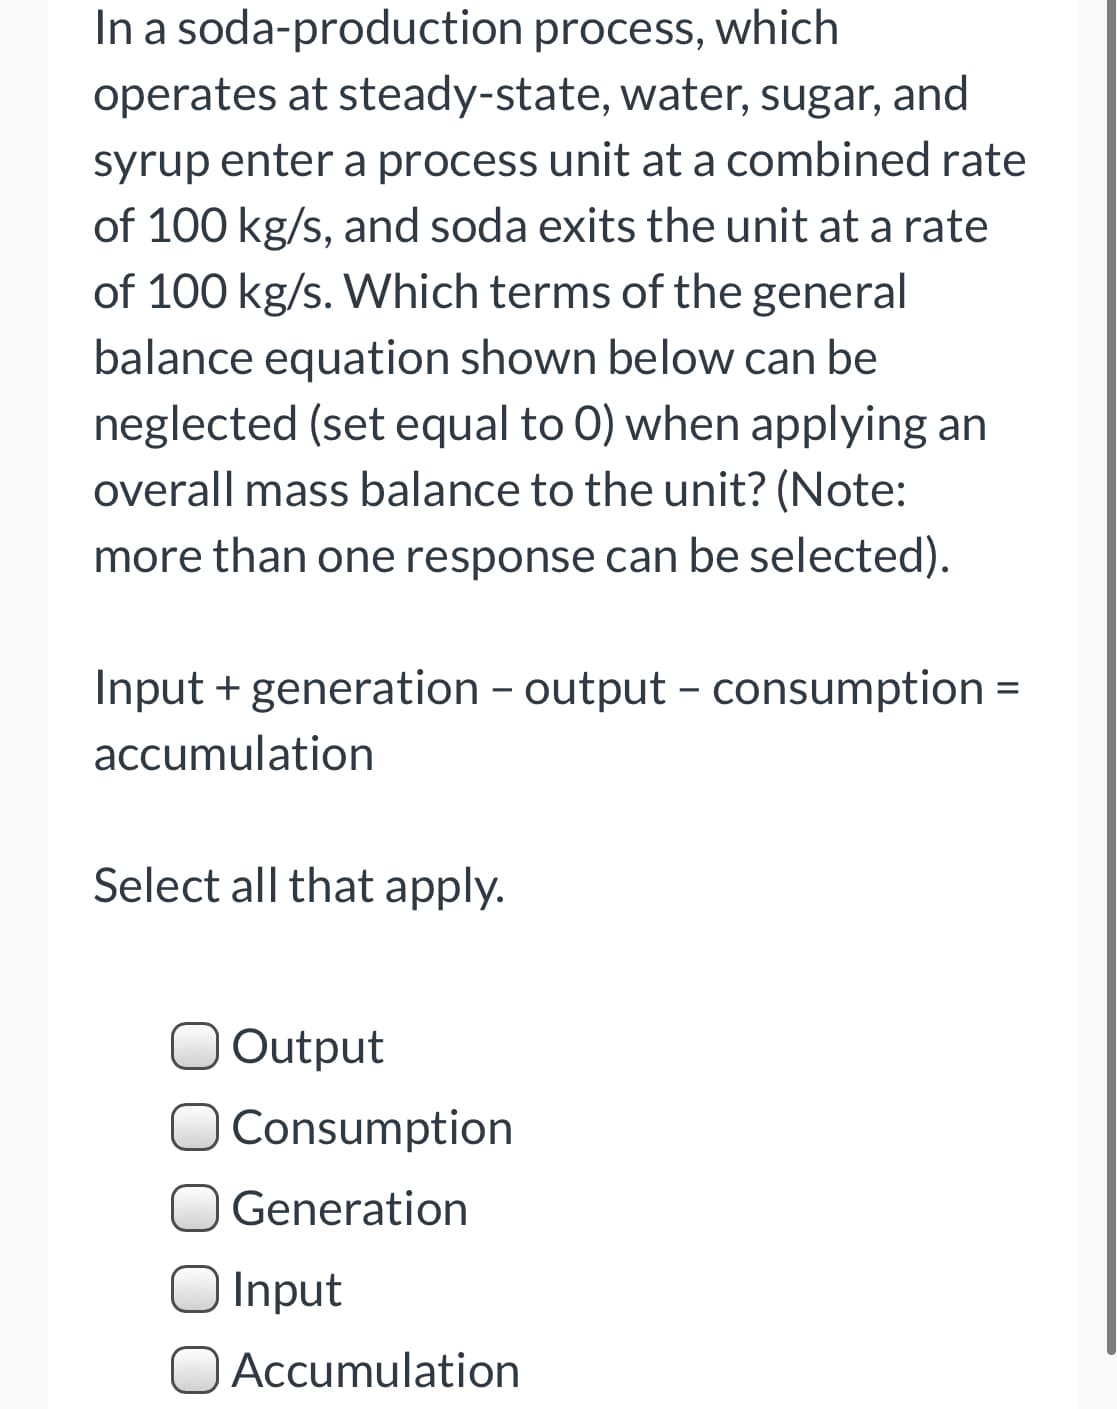 In a soda-production process, which
operates at steady-state, water, sugar, and
syrup enter a process unit at a combined rate
of 100 kg/s, and soda exits the unit at a rate
of 100 kg/s. Which terms of the general
balance equation shown below can be
neglected (set equal to 0) when applying an
overall mass balance to the unit? (Note:
more than one response can be selected).
Input + generation - output - consumption =
accumulation
Select all that apply.
Output
O Consumption
Generation
Input
Accumulation
